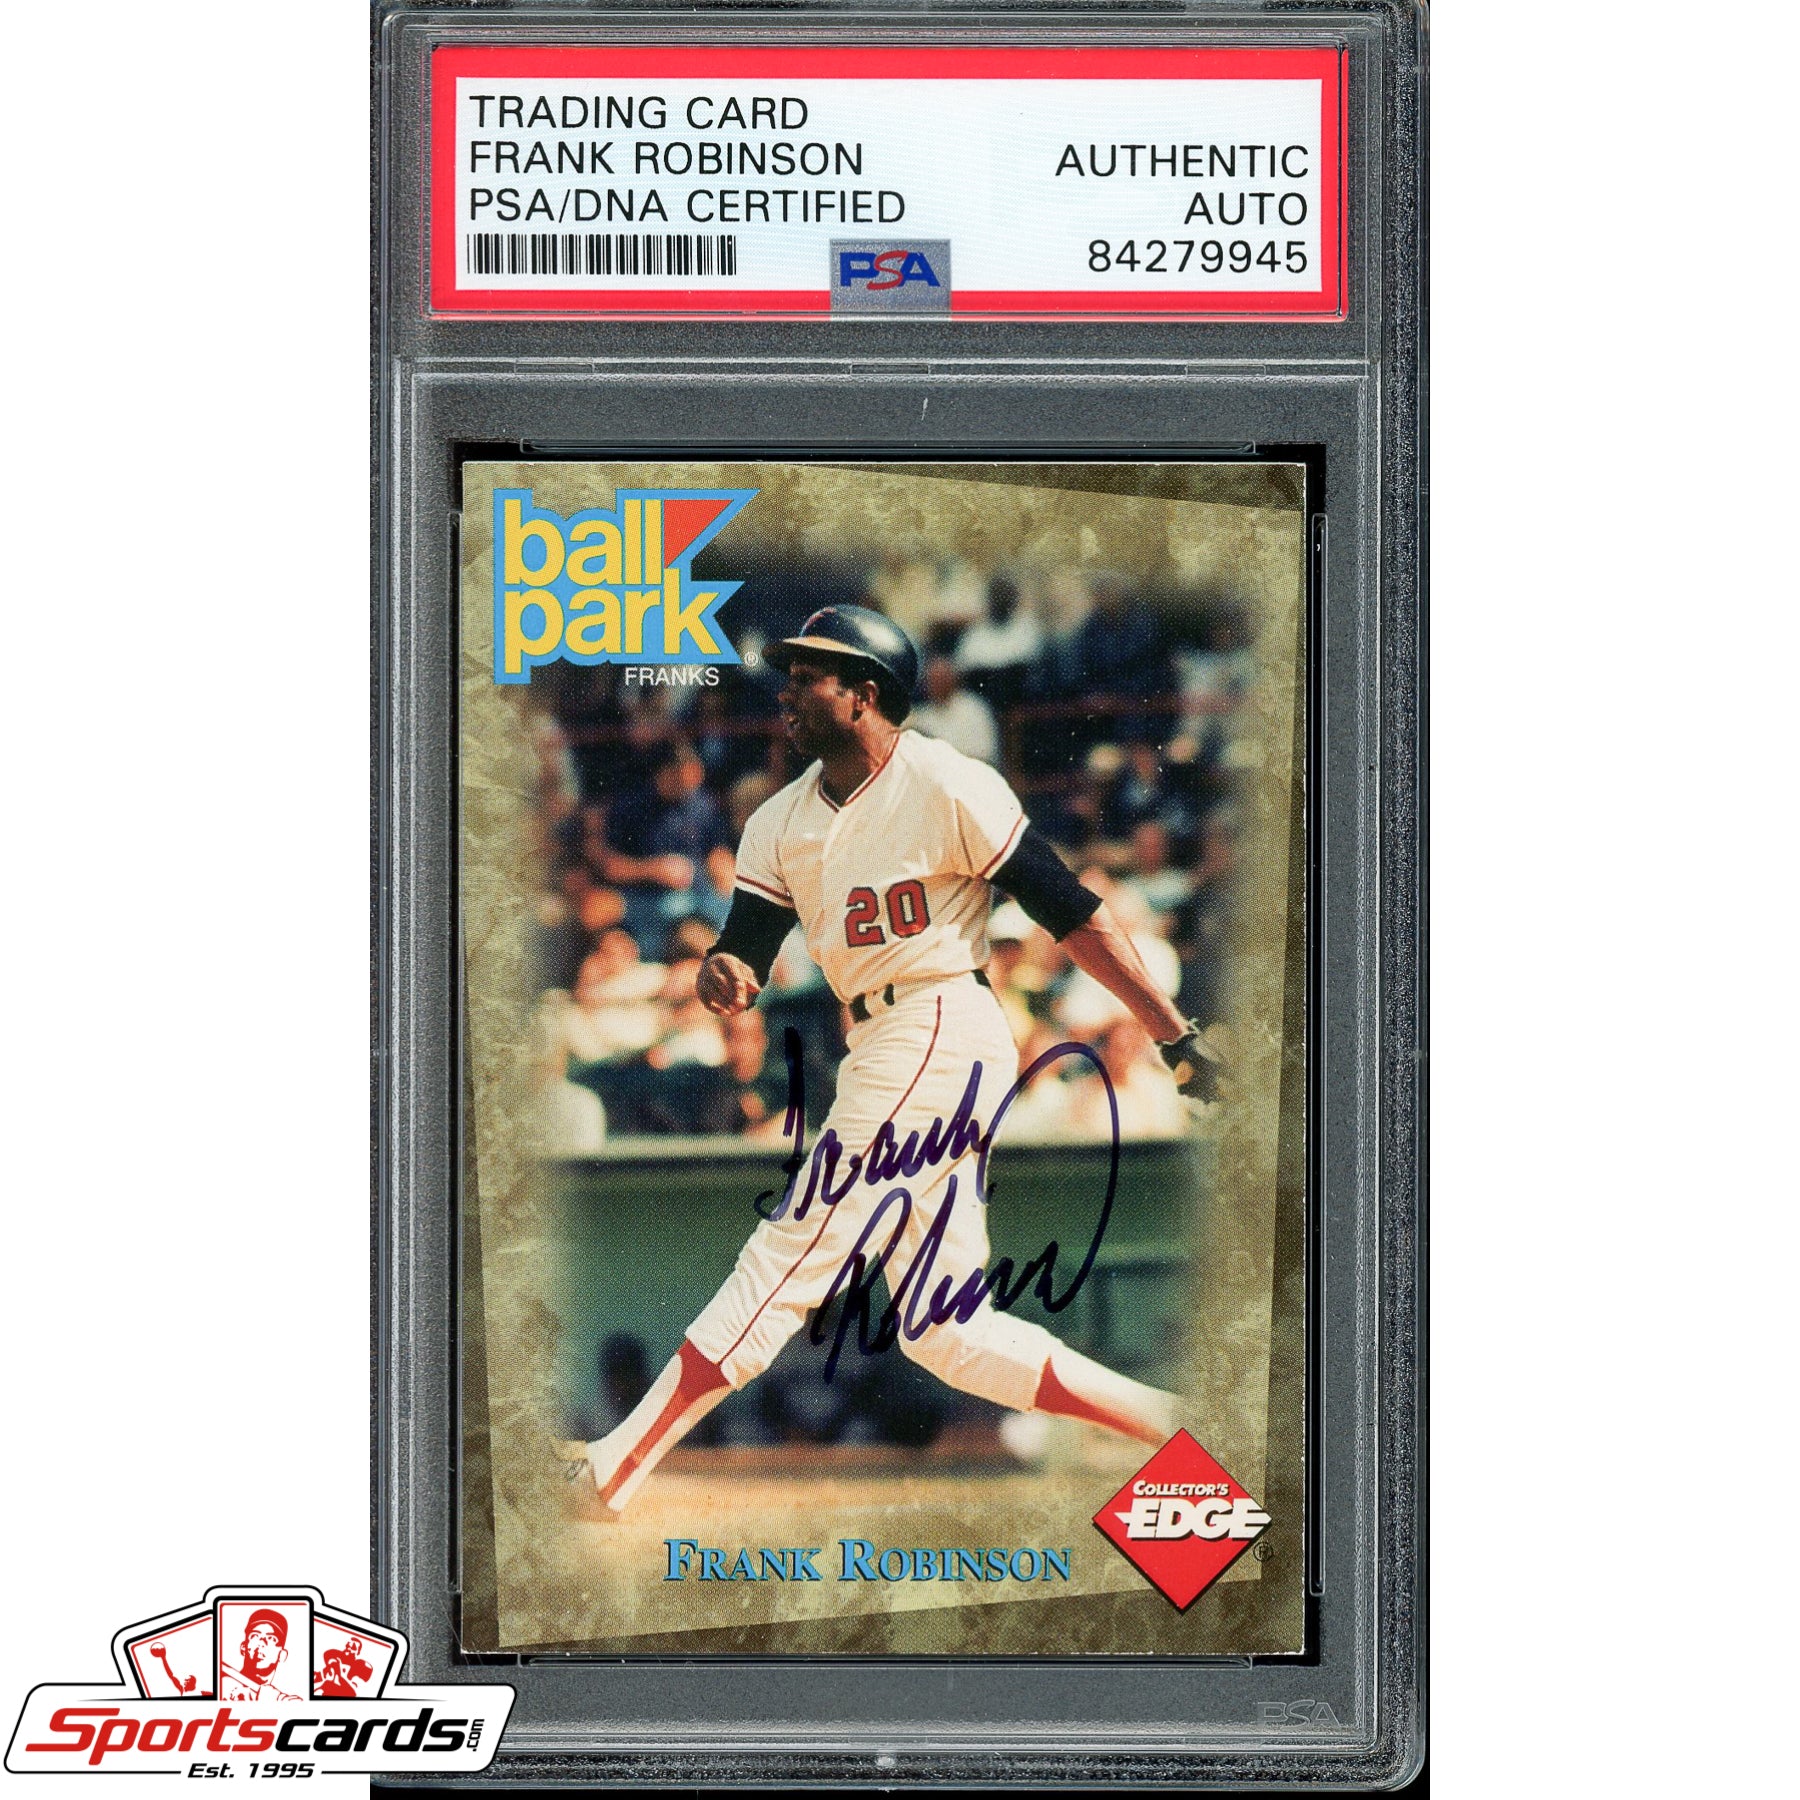 Frank Robinson Signed Autographed Collector's Edge Ball Park Card PSA/DNA